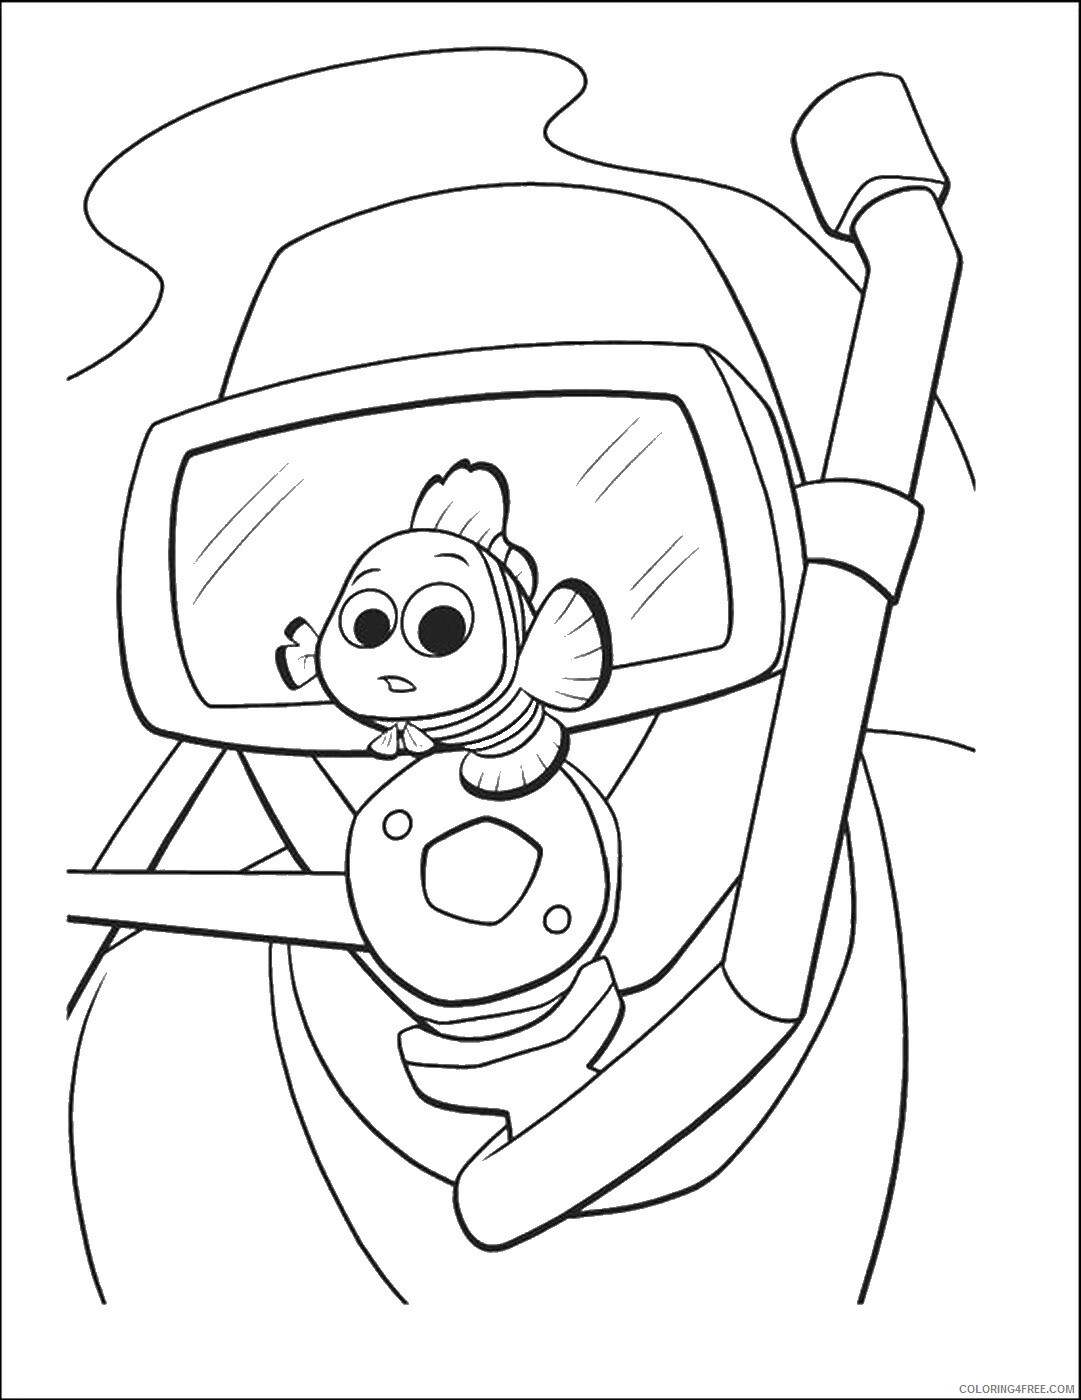 Finding Nemo Coloring Pages TV Film findingnemoc13 Printable 2020 02816 Coloring4free